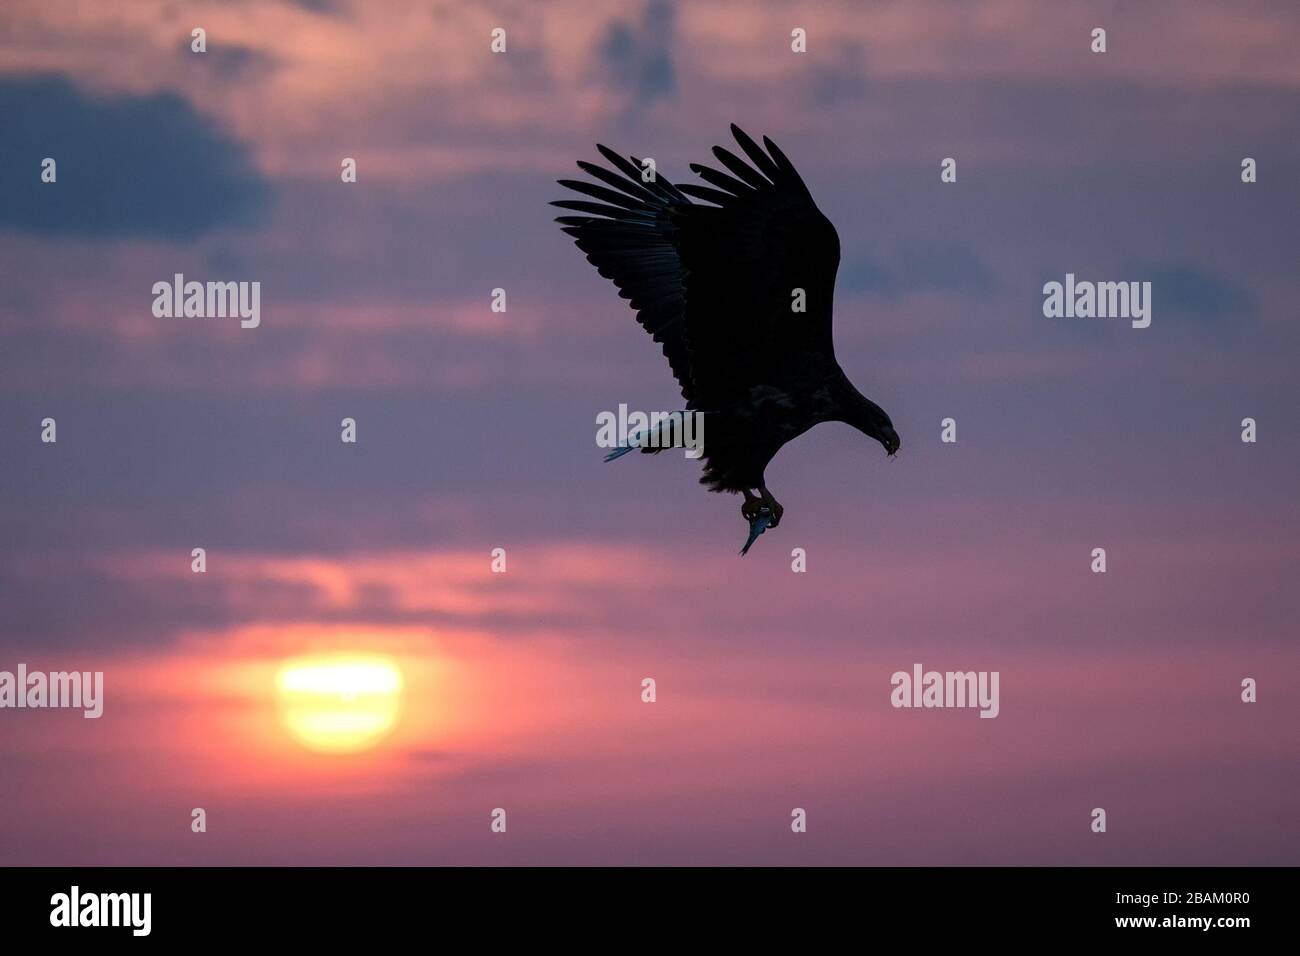 White-tailed eagle in flight, eagle with a fish which has been just plucked from the water in Hokkaido, Japan, silhouette of eagle with a fish at sunr Stock Photo